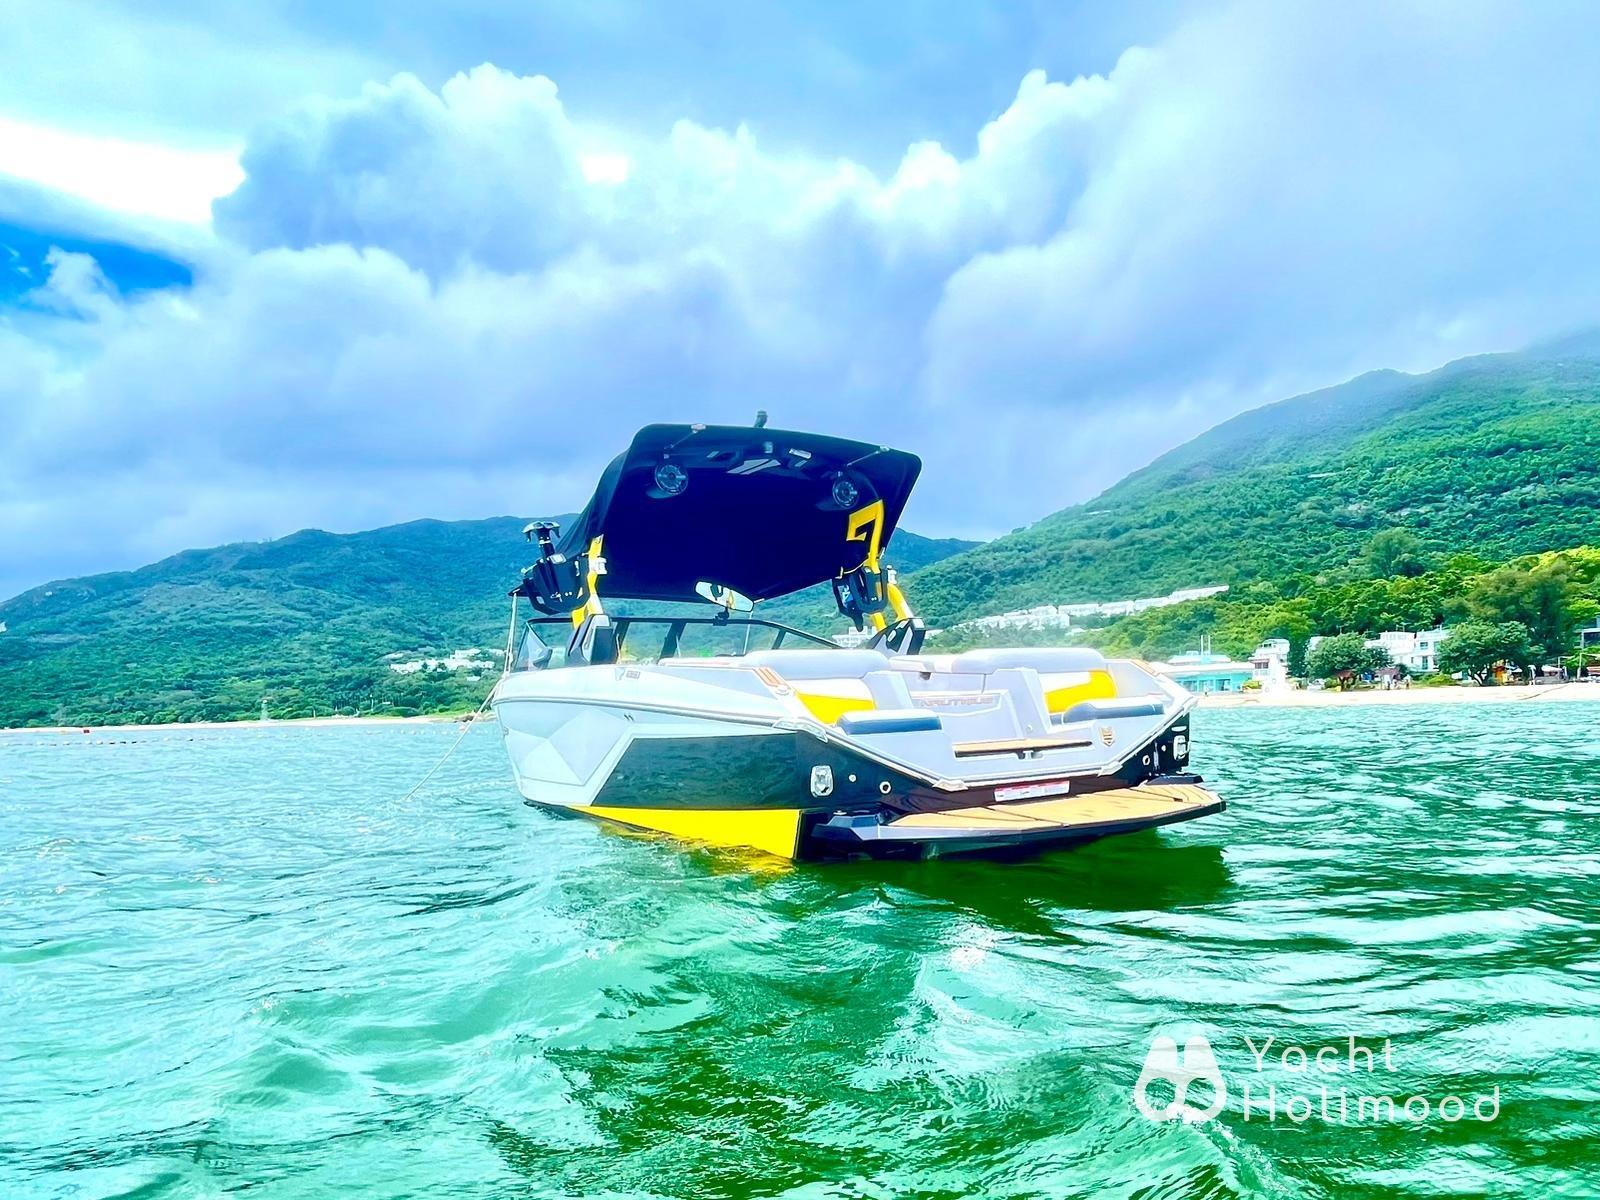 DD02 [3 hours or above] Rare Nautique G23 Wakesurf in Lantau Island! Direct Onboard from Cheung Sha 1